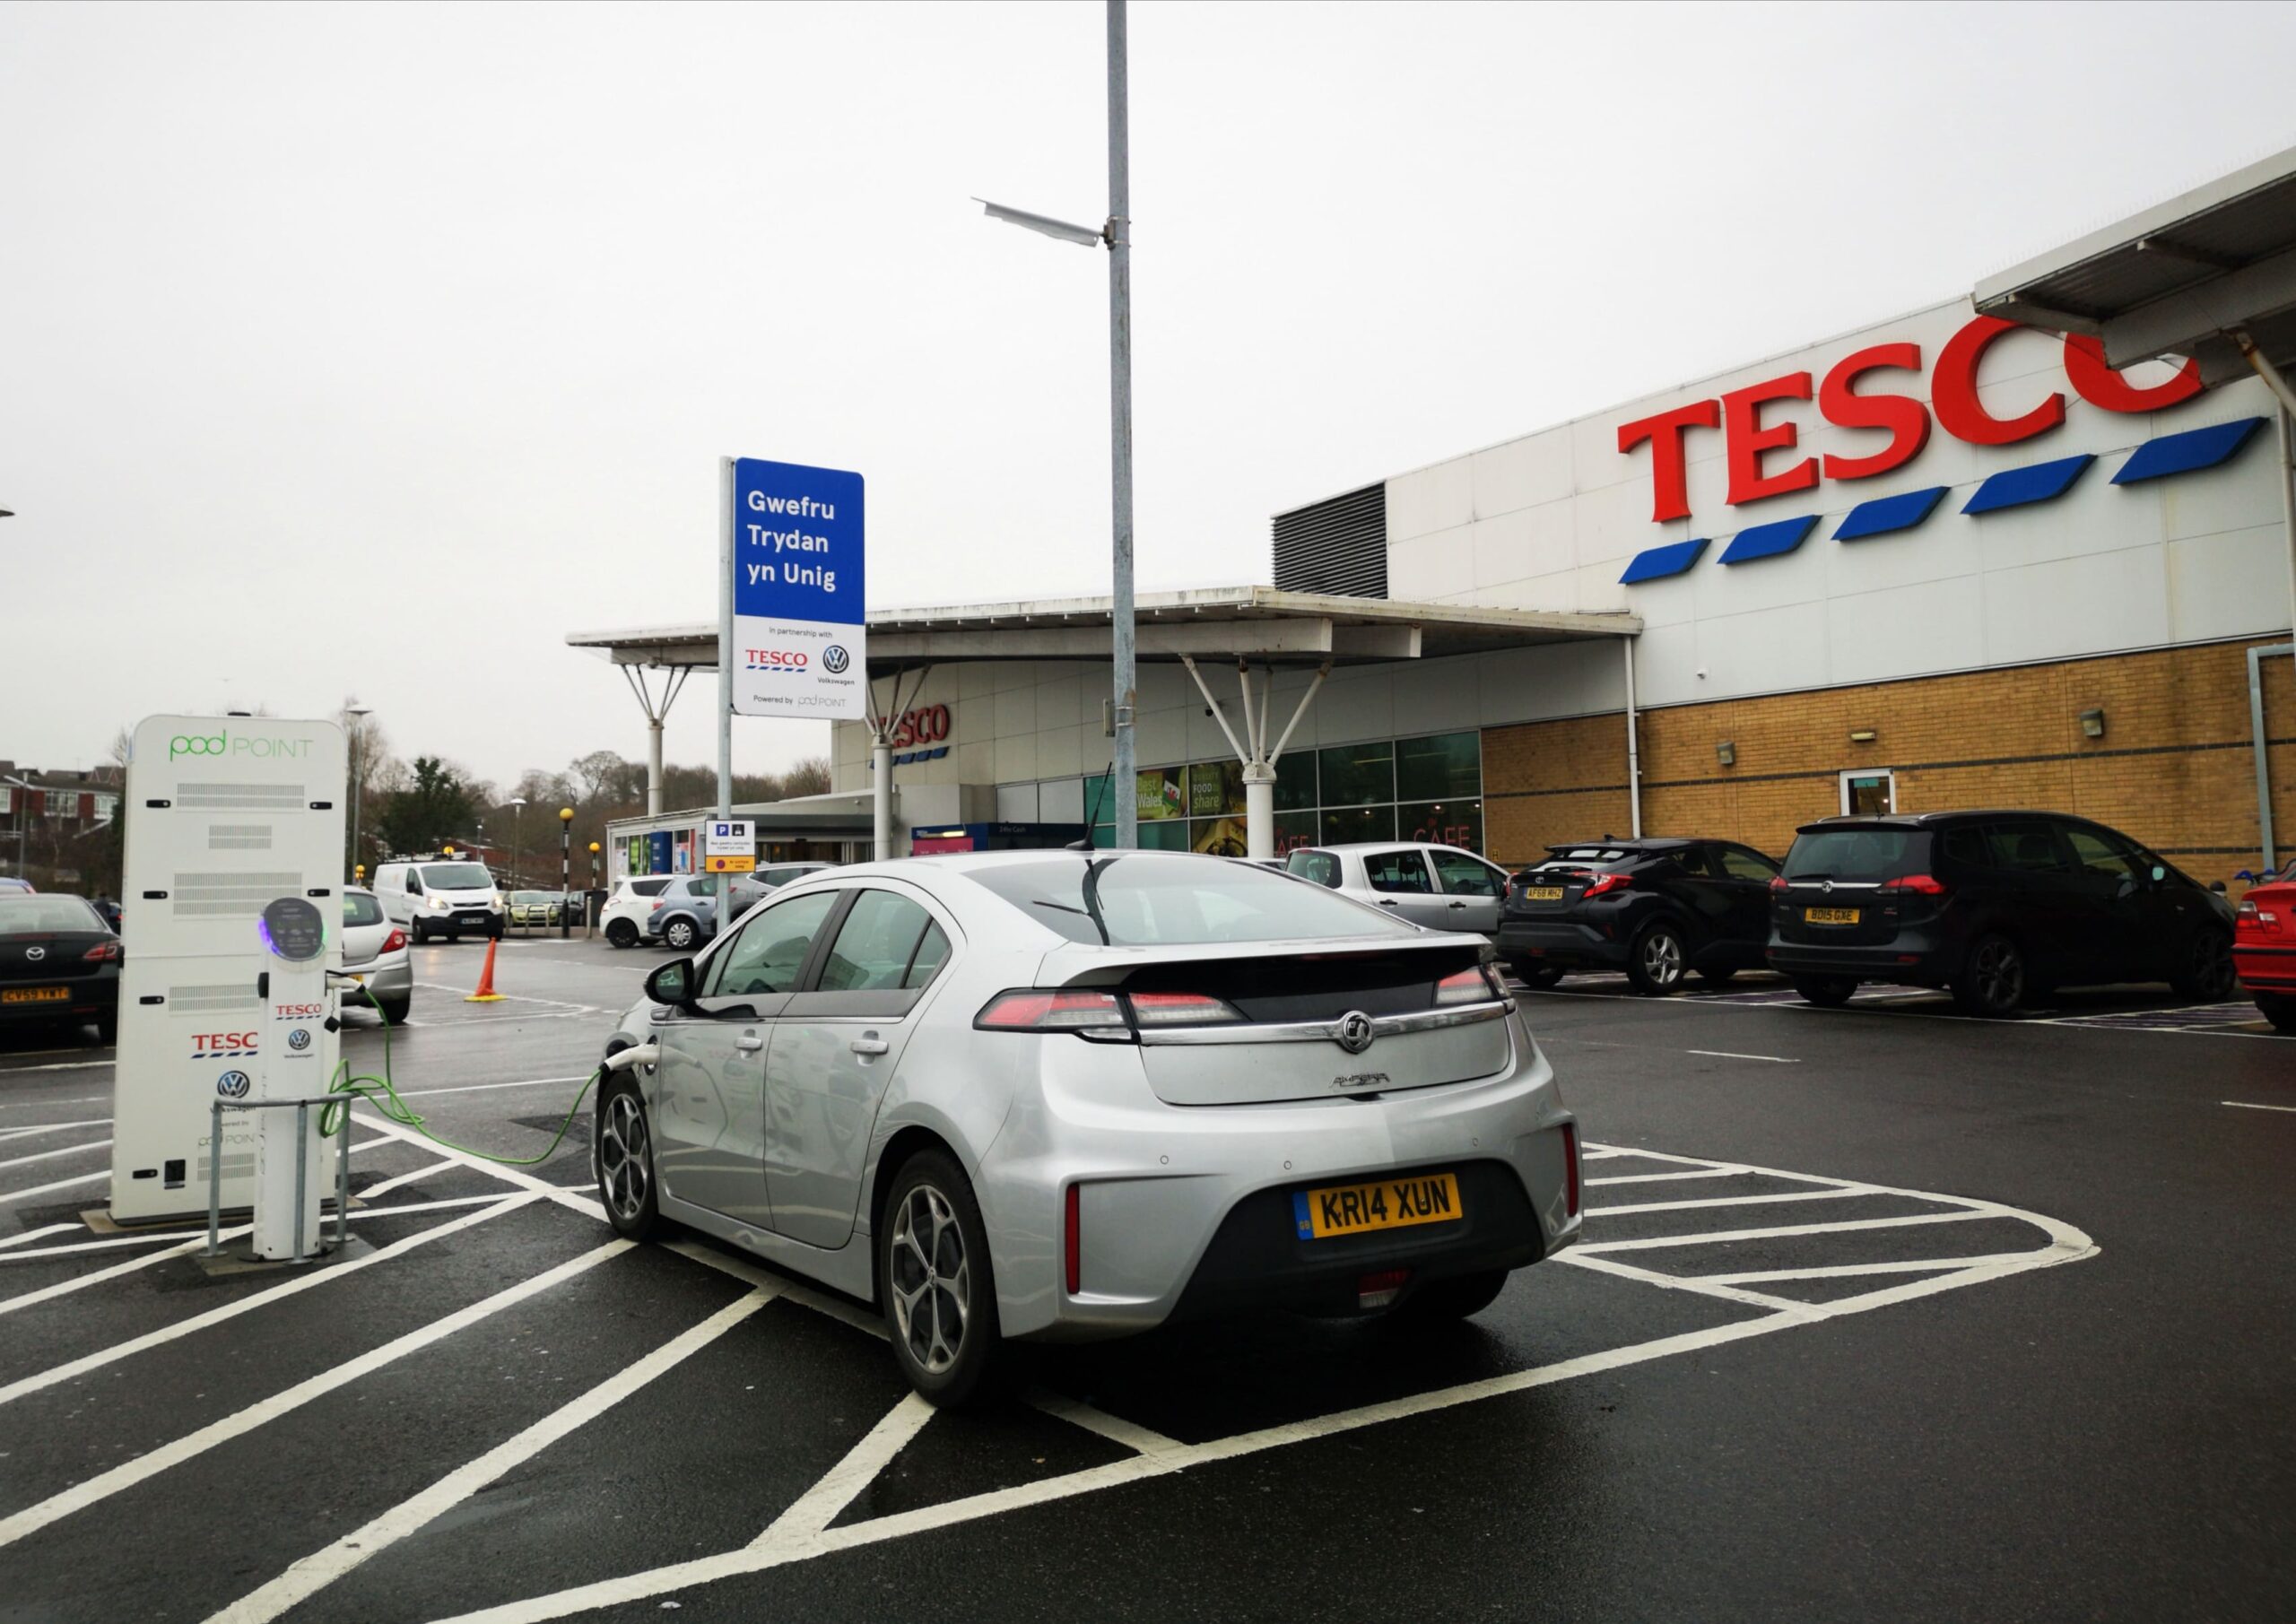 Supermarket giant leads the way for electric vehicle charge points